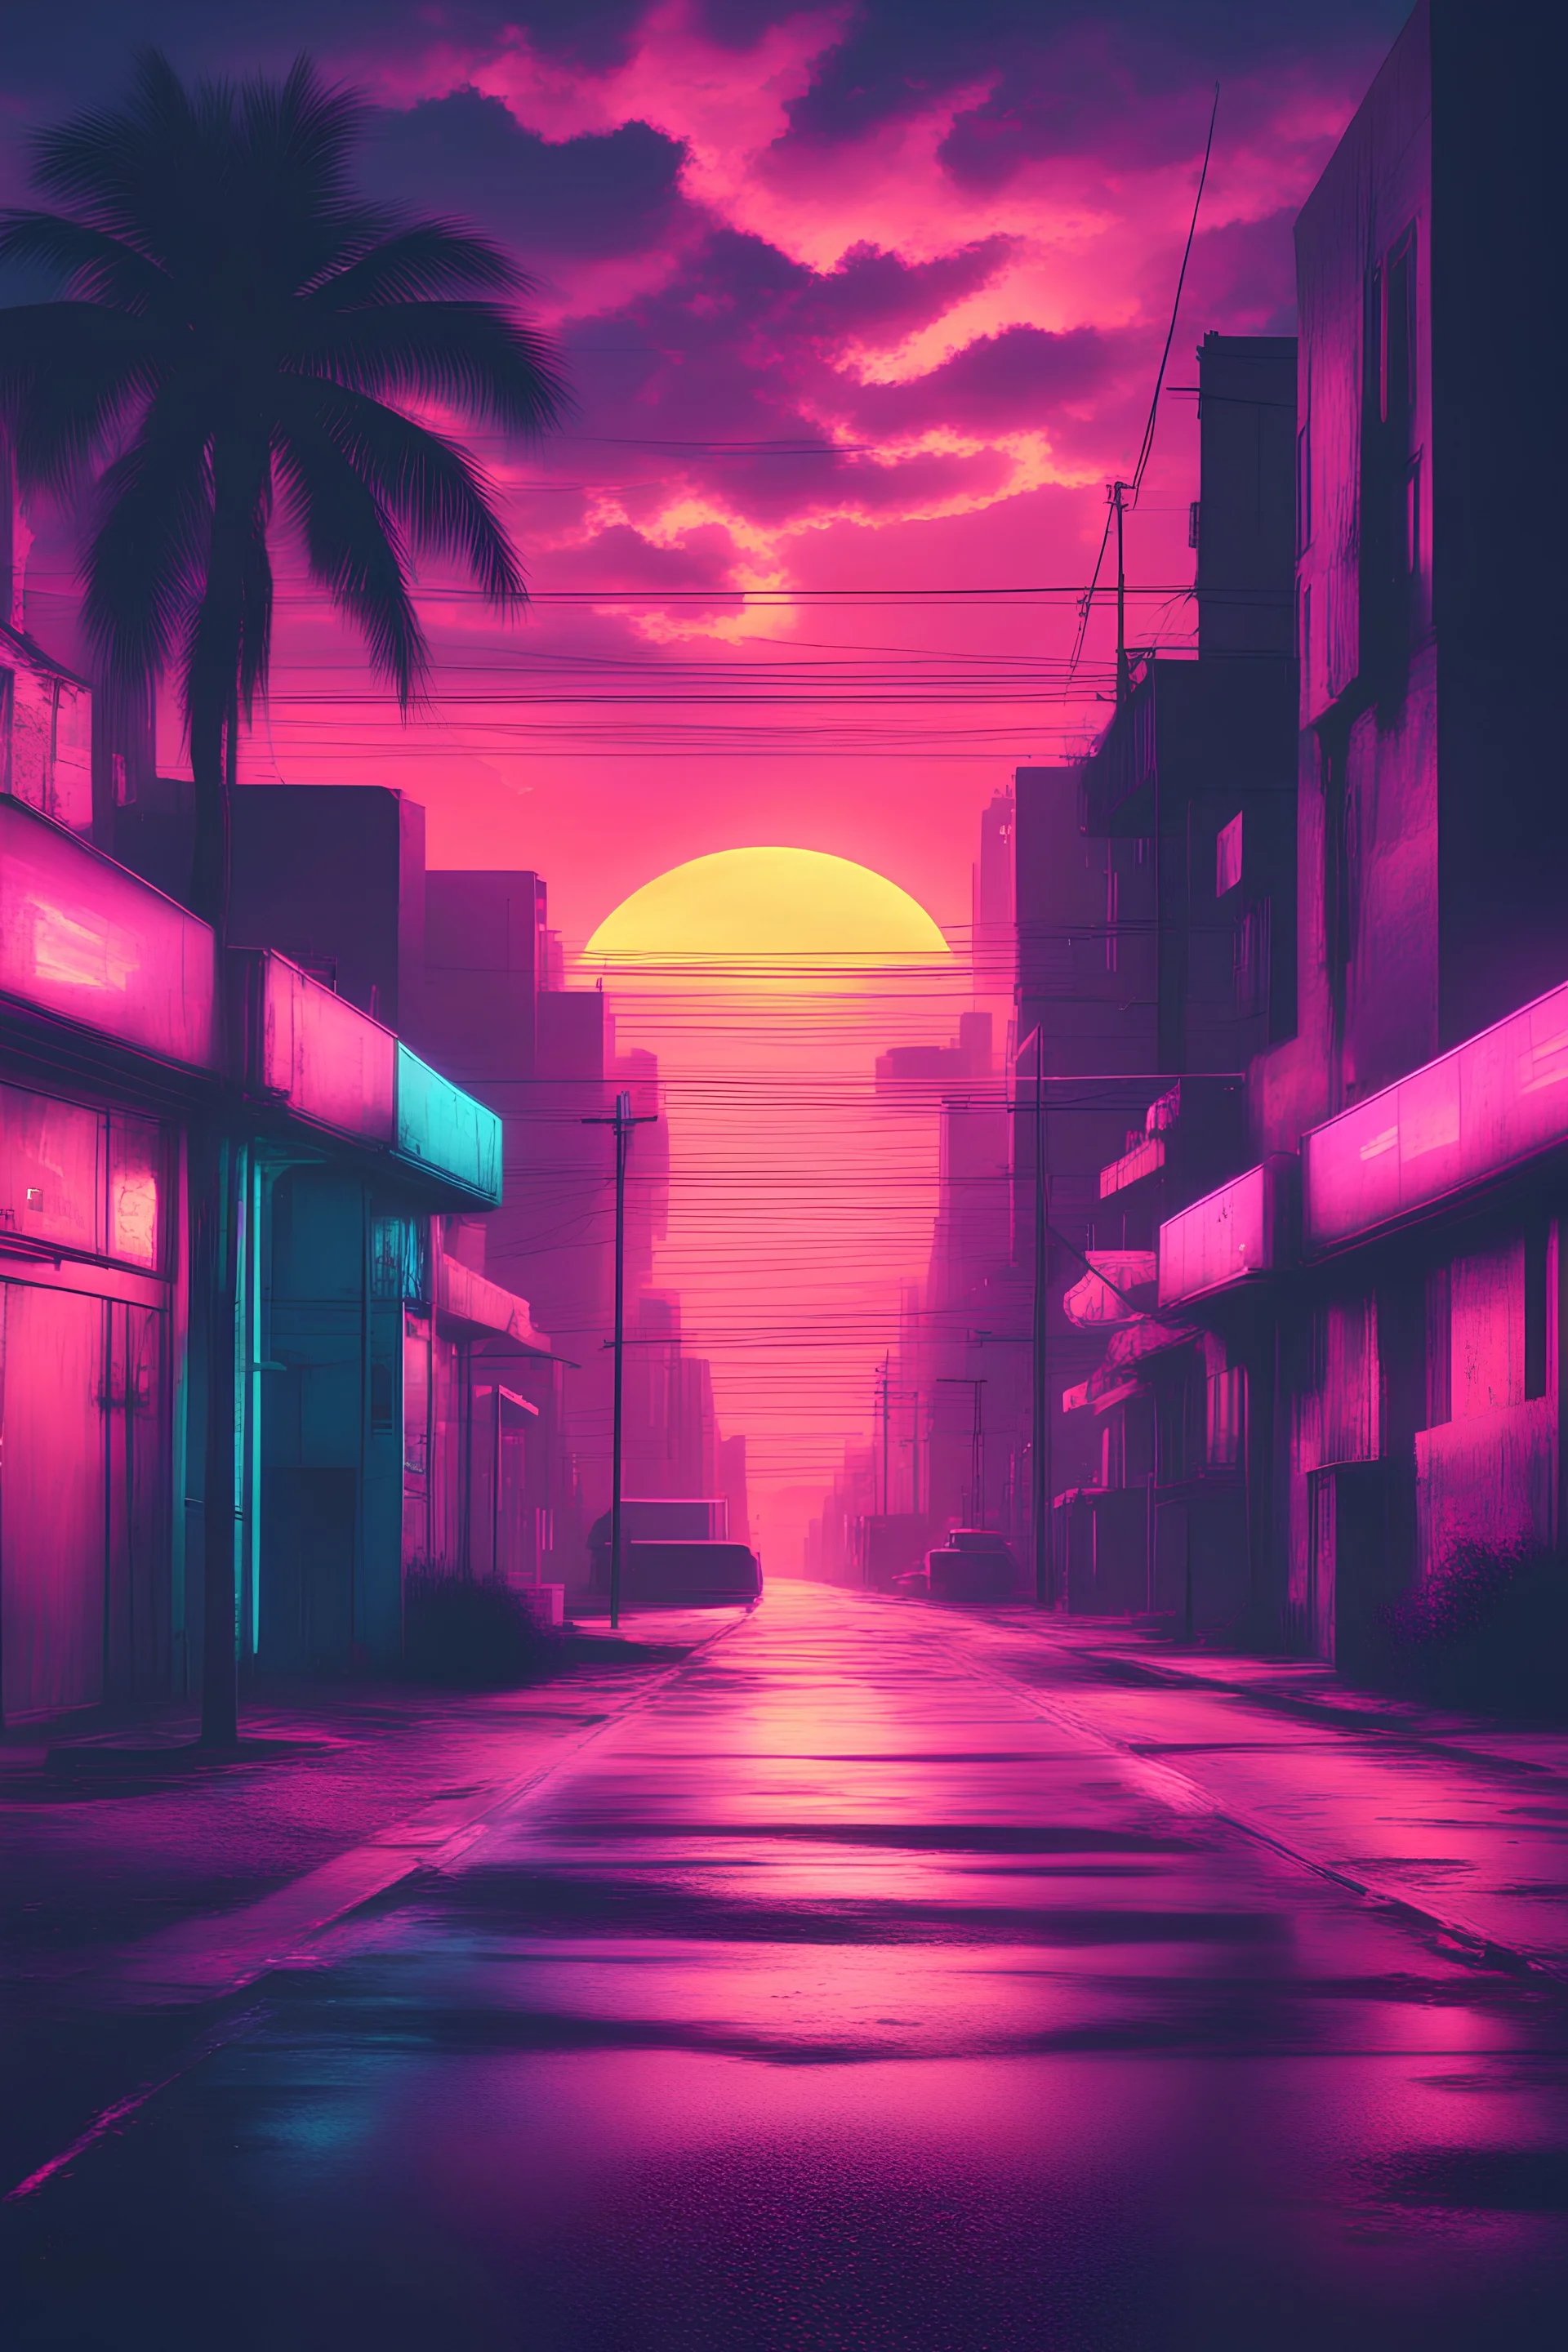 Retro wave, synth wave, with neon light, sunset, clouds, deserted street